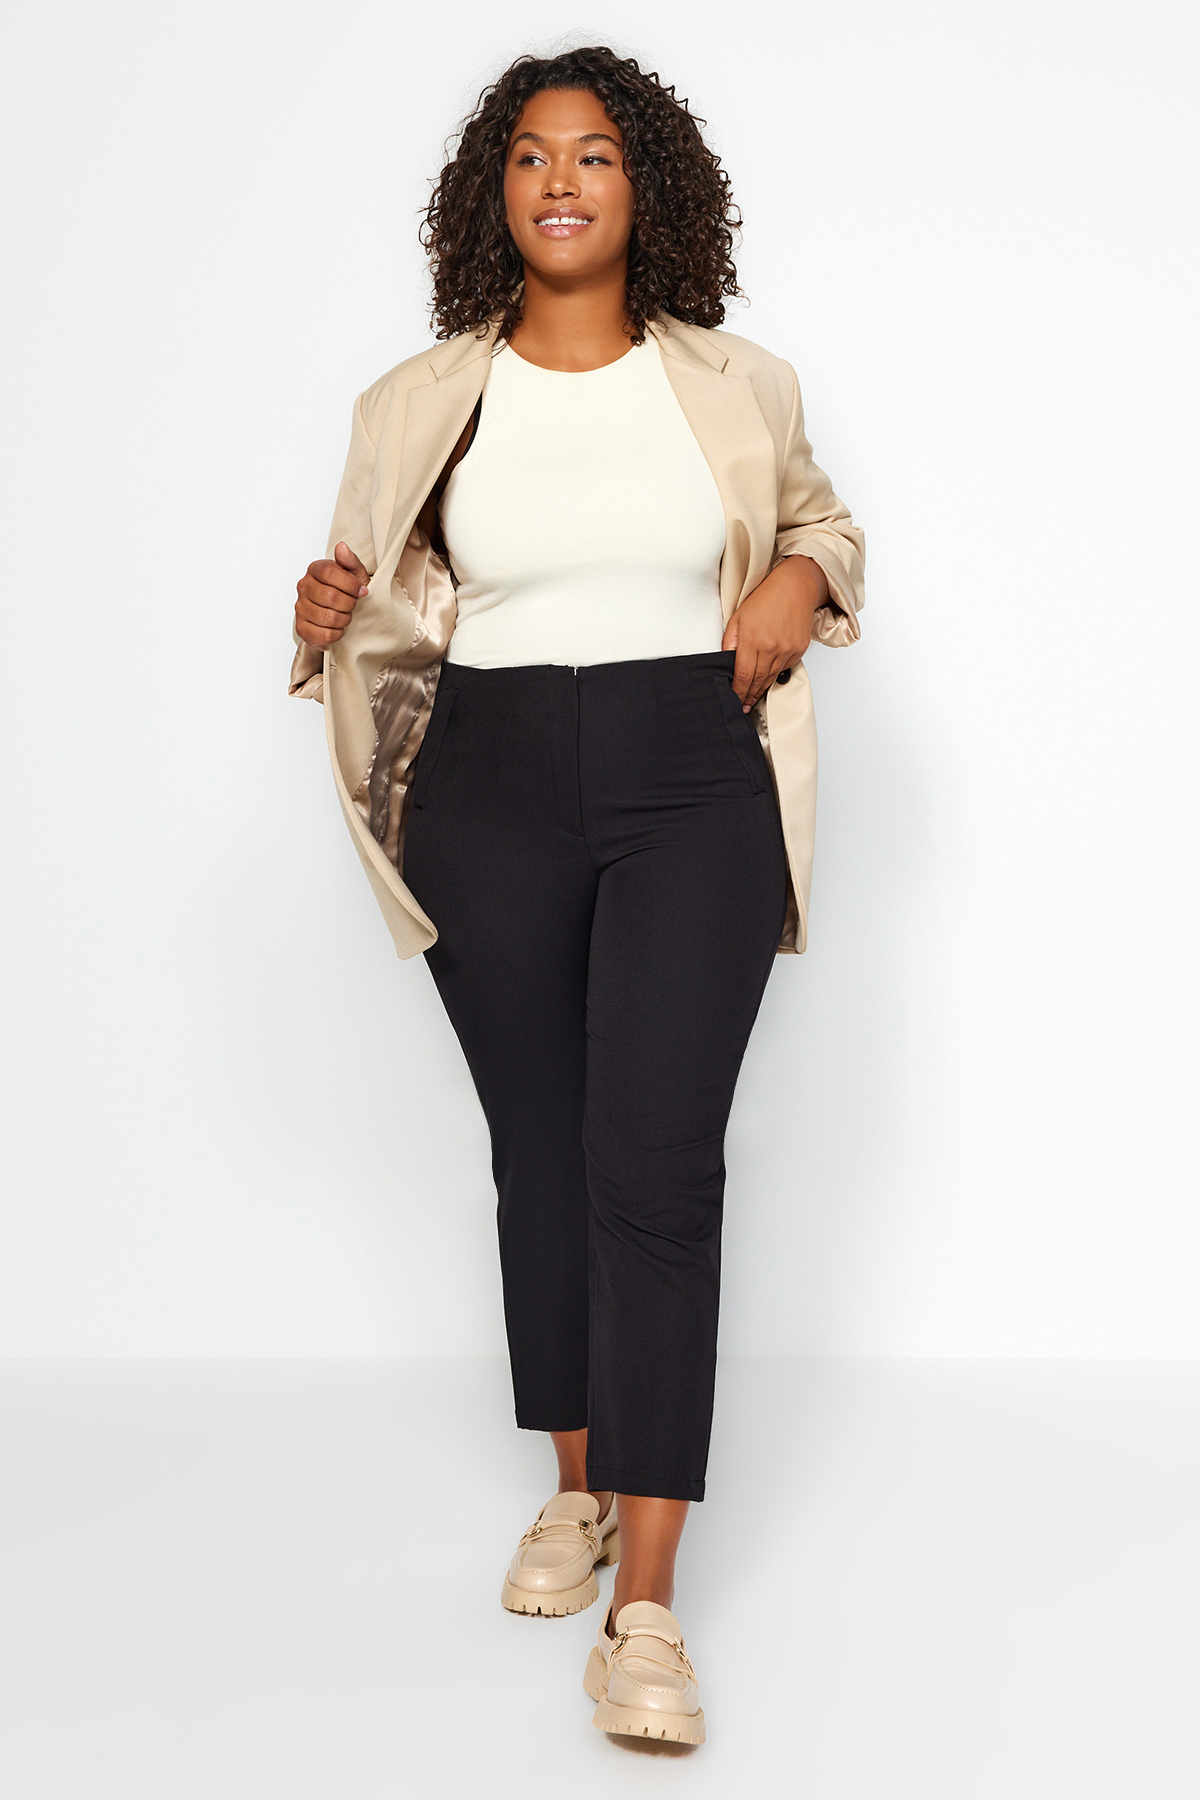 Up To 56% Off on 2 Pairs Women' Plus Size Pant